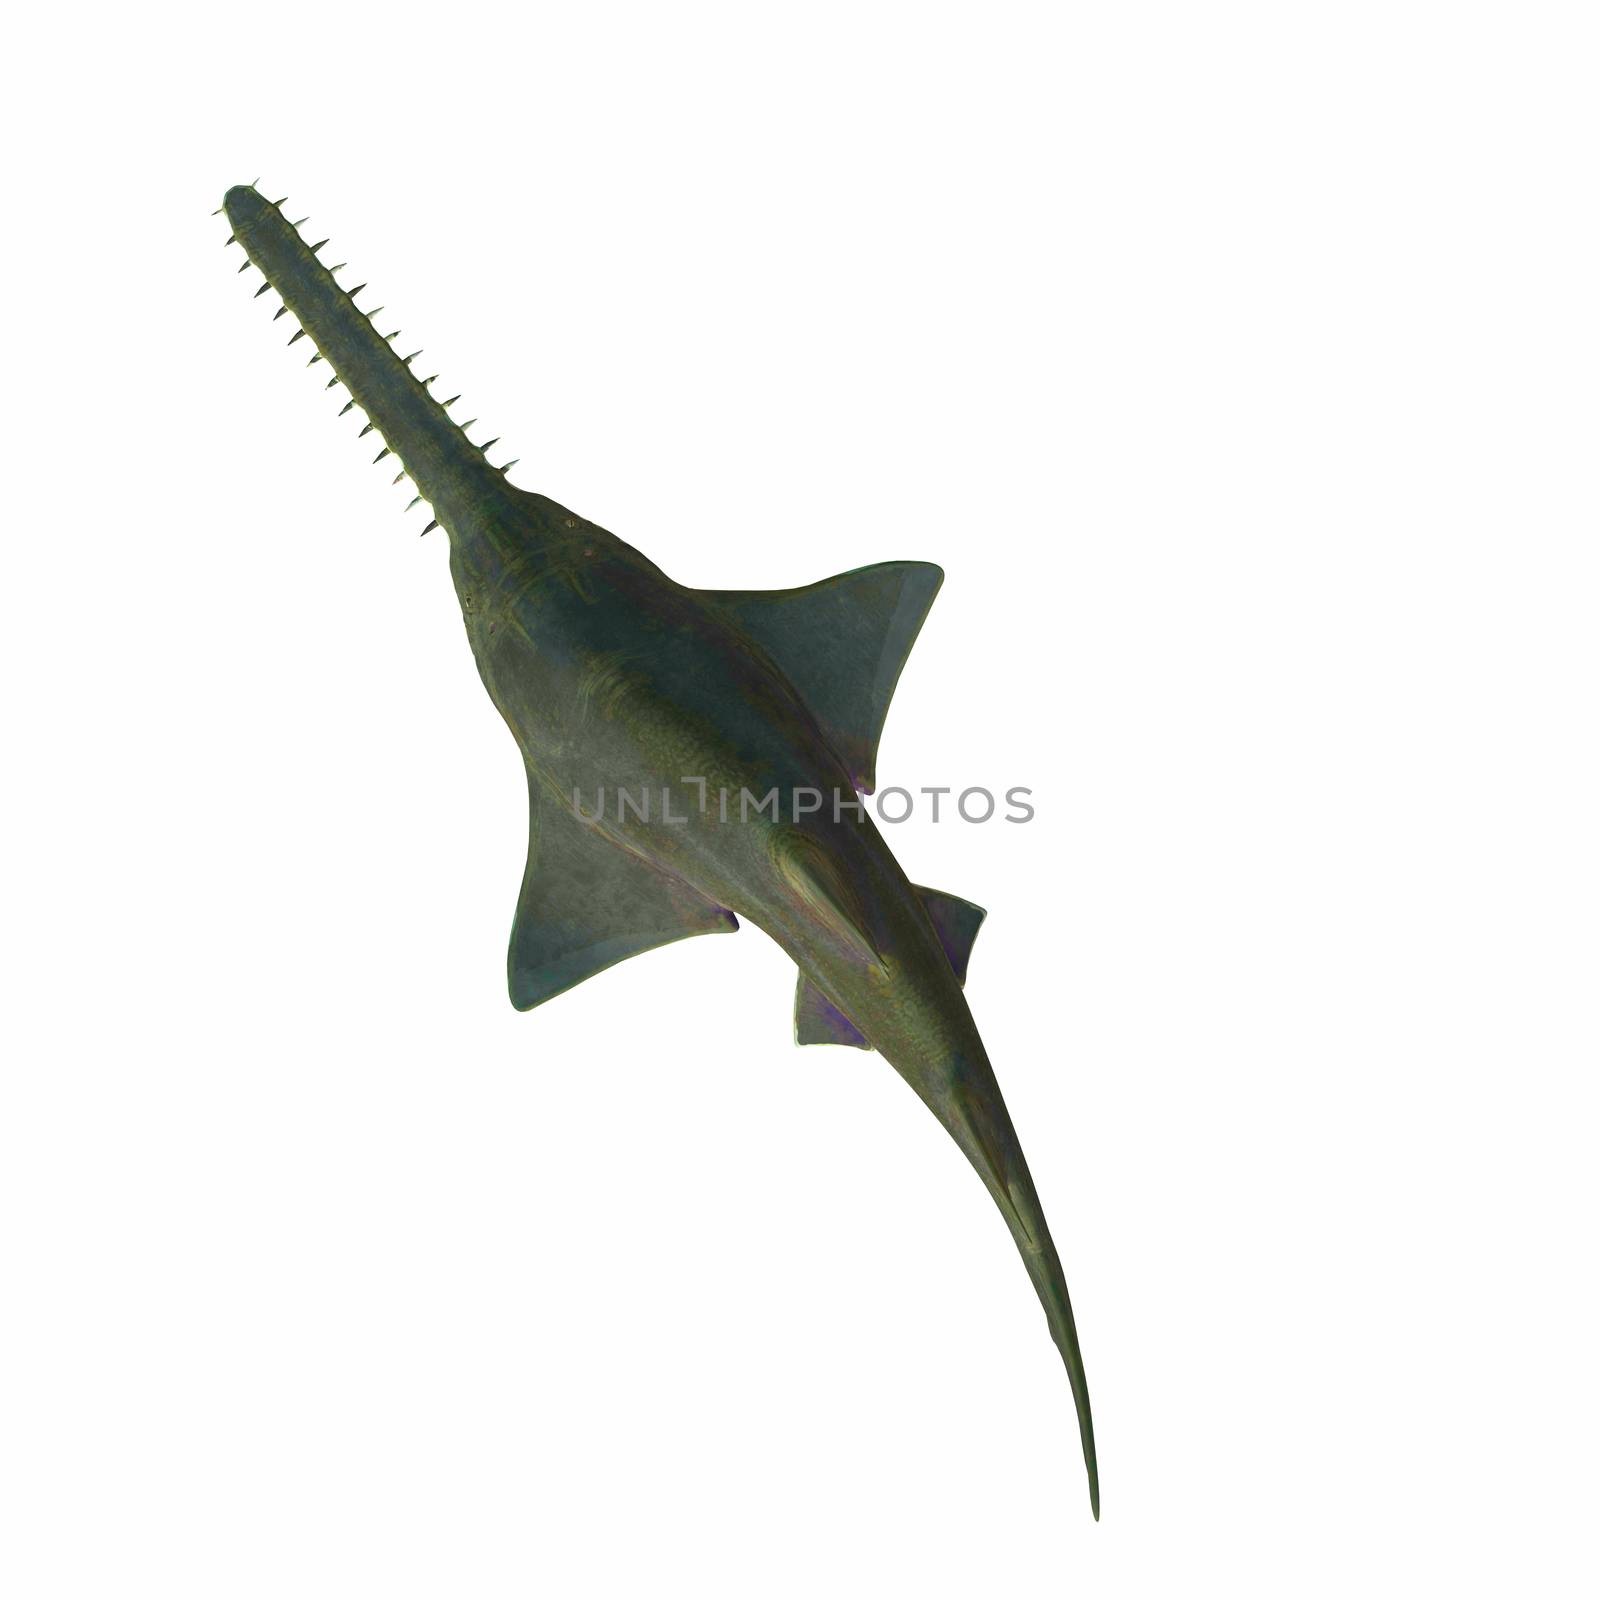 Onchopristis Sawfish Overview by Catmando